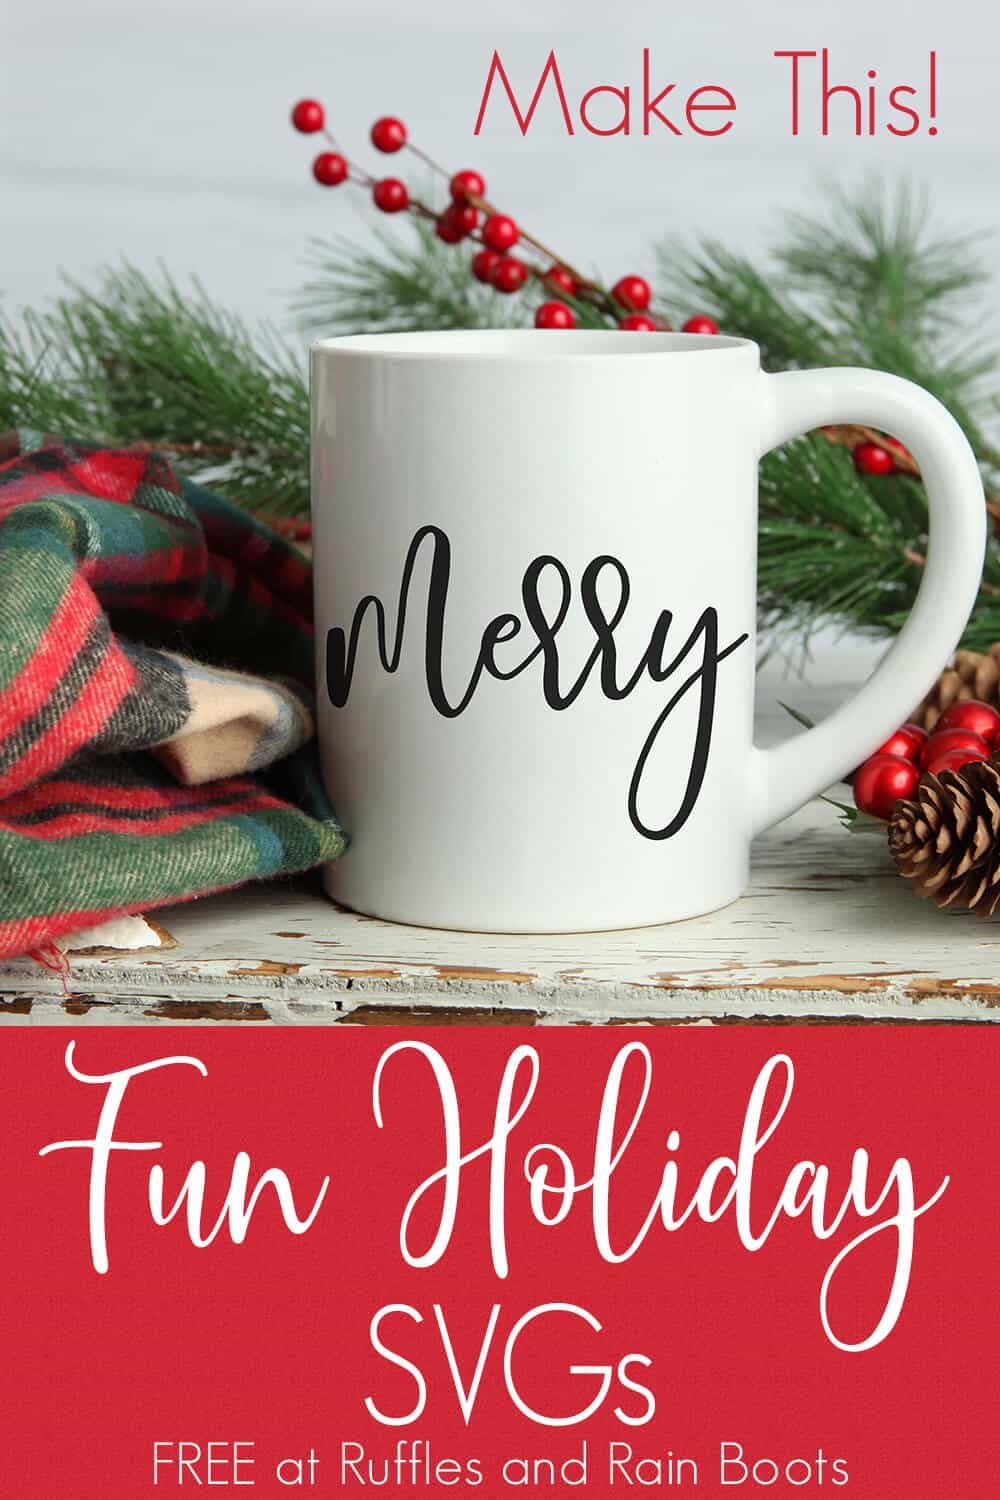 Merry free Christmas SVG on Coffee mug with text which reads fun holiday SVGs